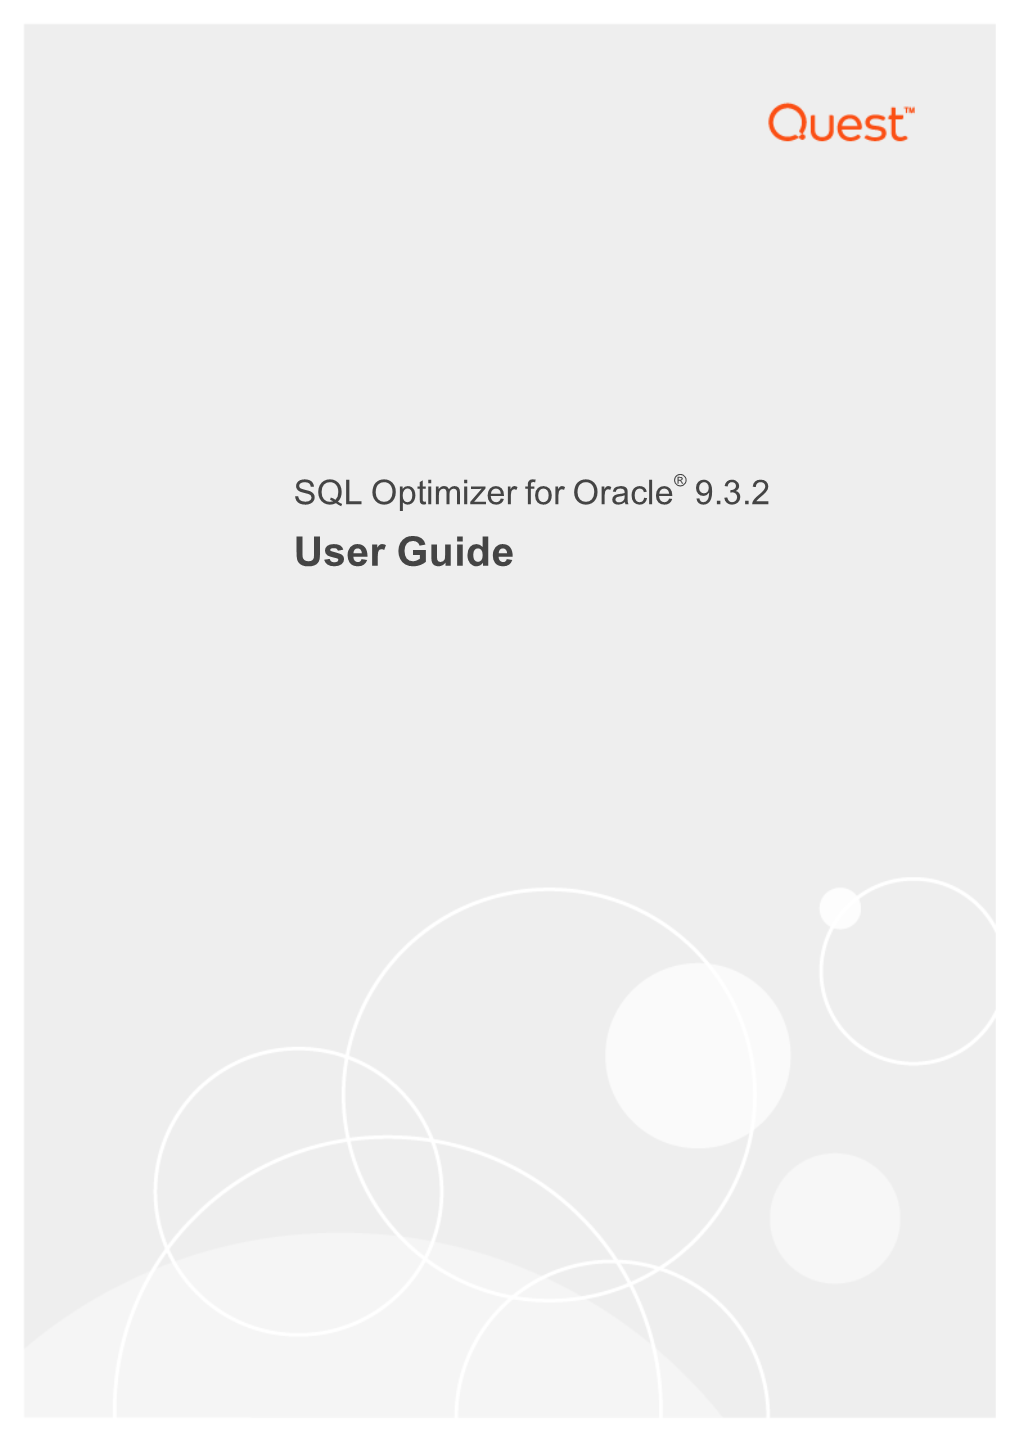 SQL Optimizer for Oracle® 9.3.2 User Guide Copyright 2019 Quest Software Inc